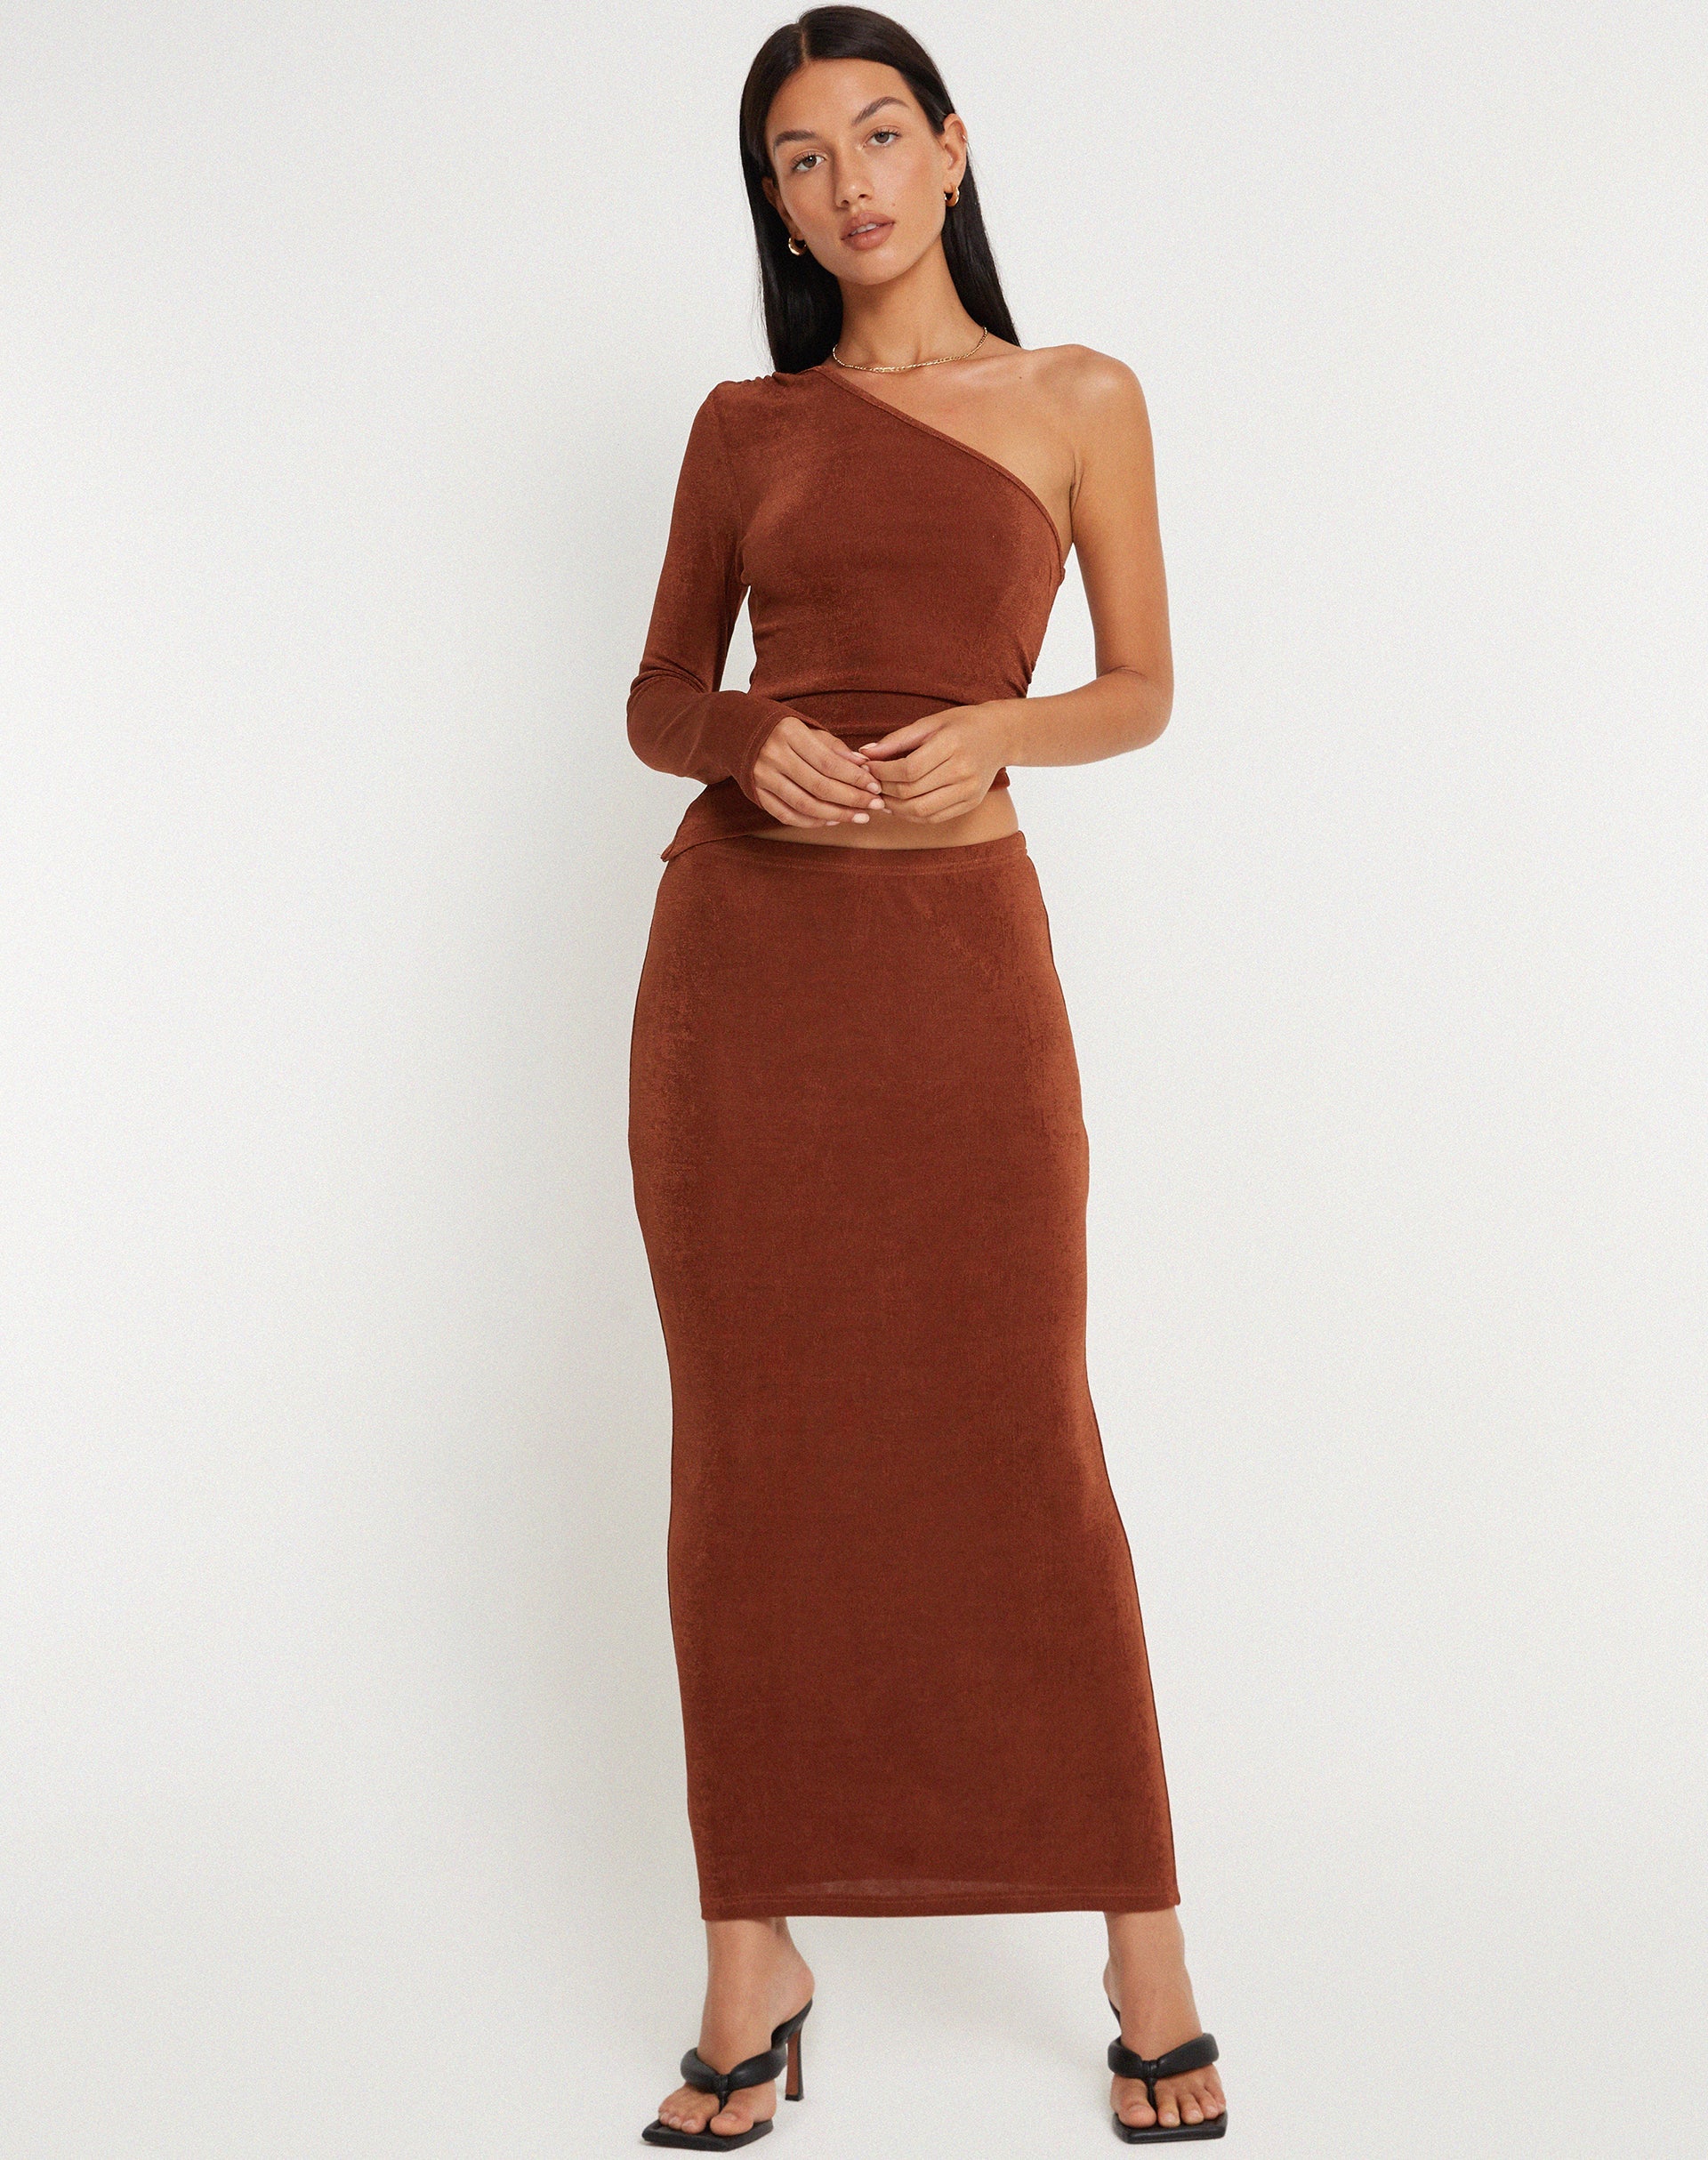 image of Tulus Maxi Skirt in Coffee Bean